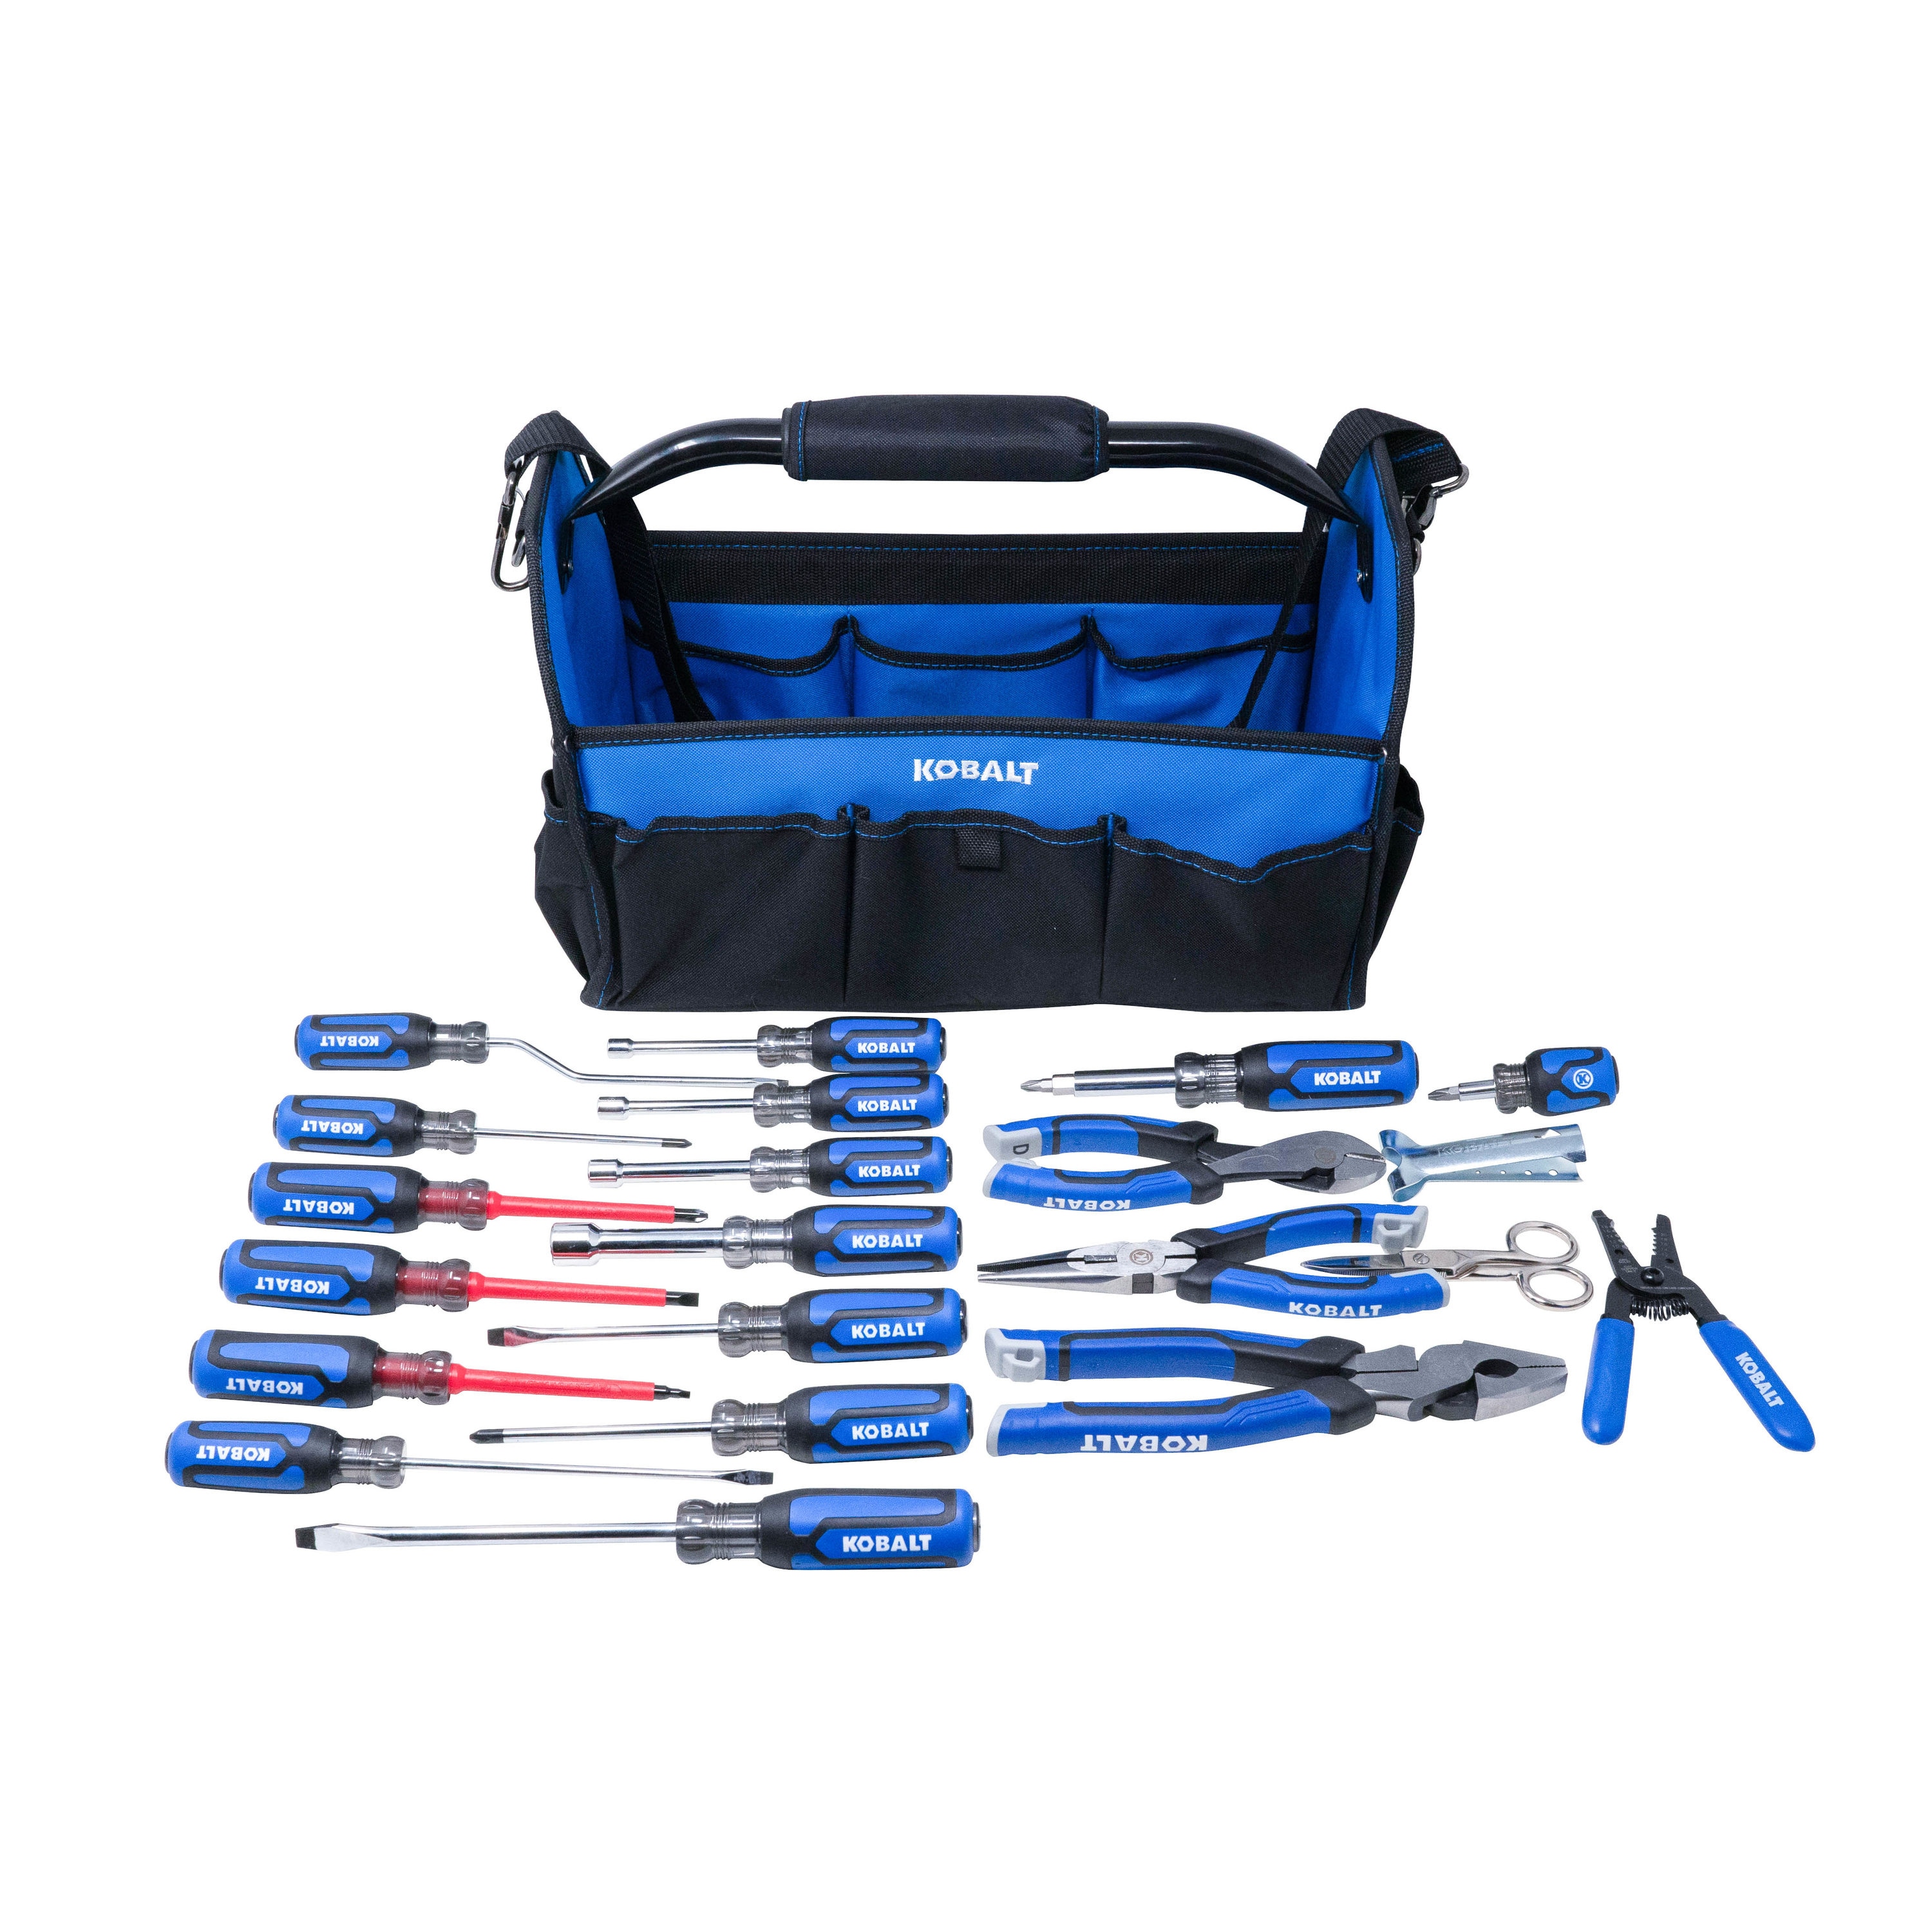 Kobalt Mini Toolbox 25th Anniversary Edition Blue with a Walter